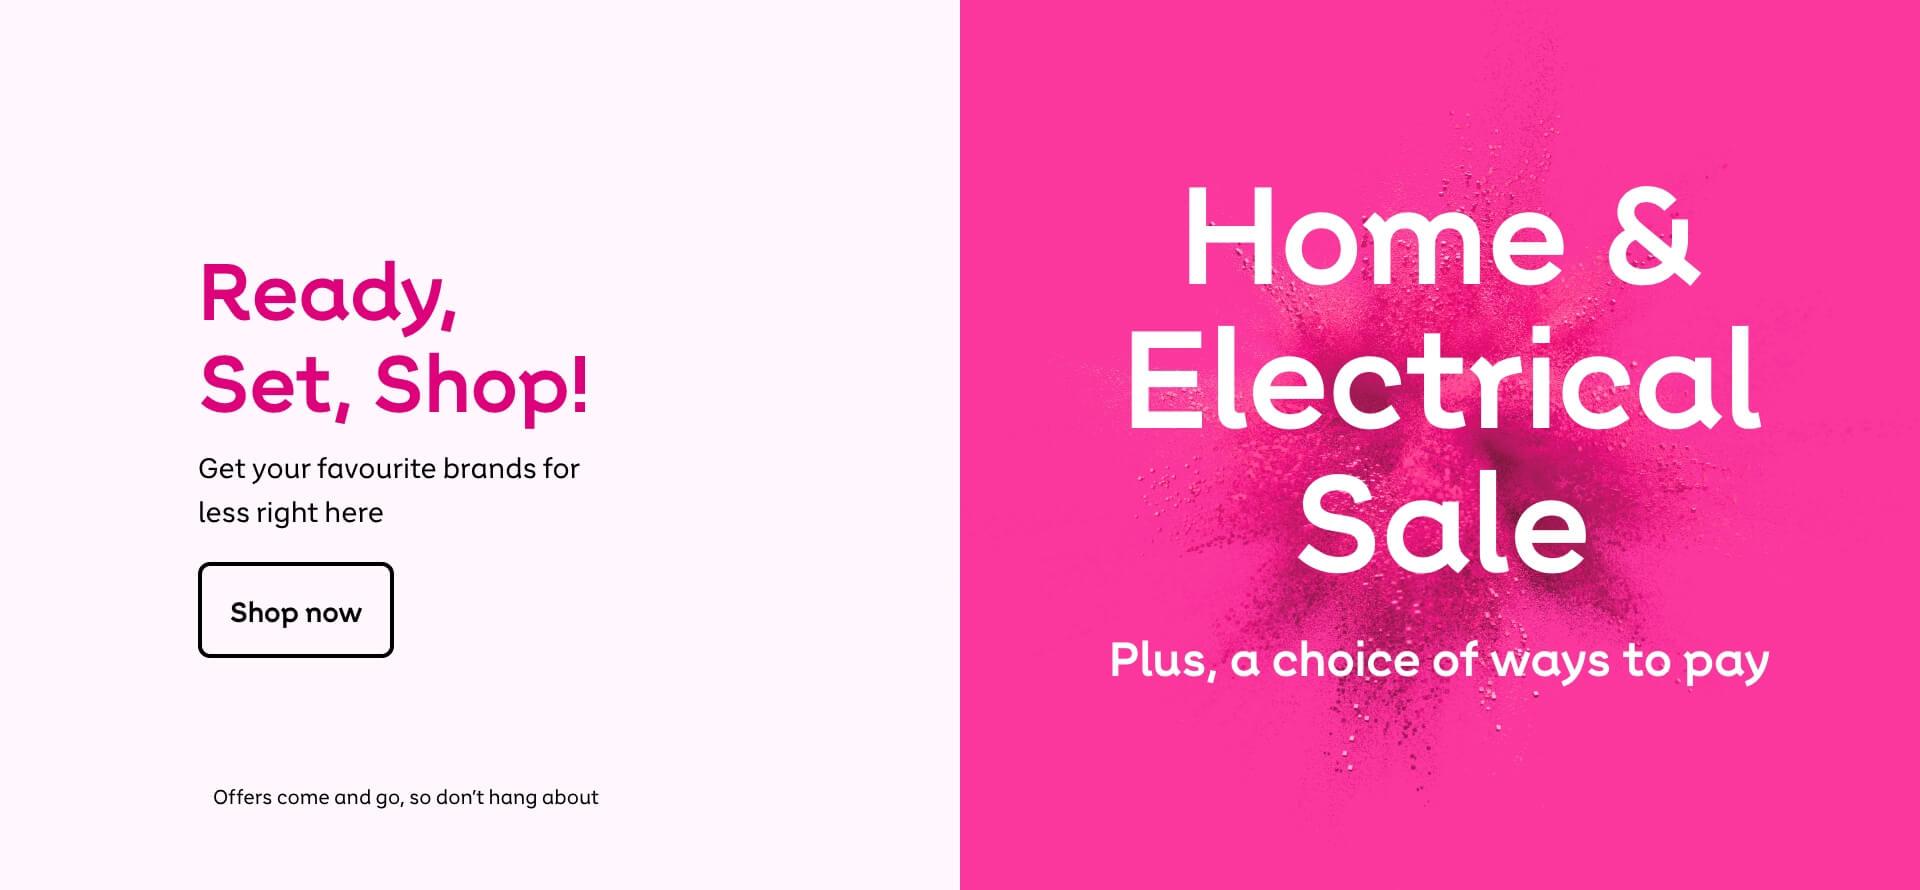 Home & Electrical sale. Ready, set, shop! Get your favourite brands for less right here. Shop now. Offers come and go, so don't hang about.